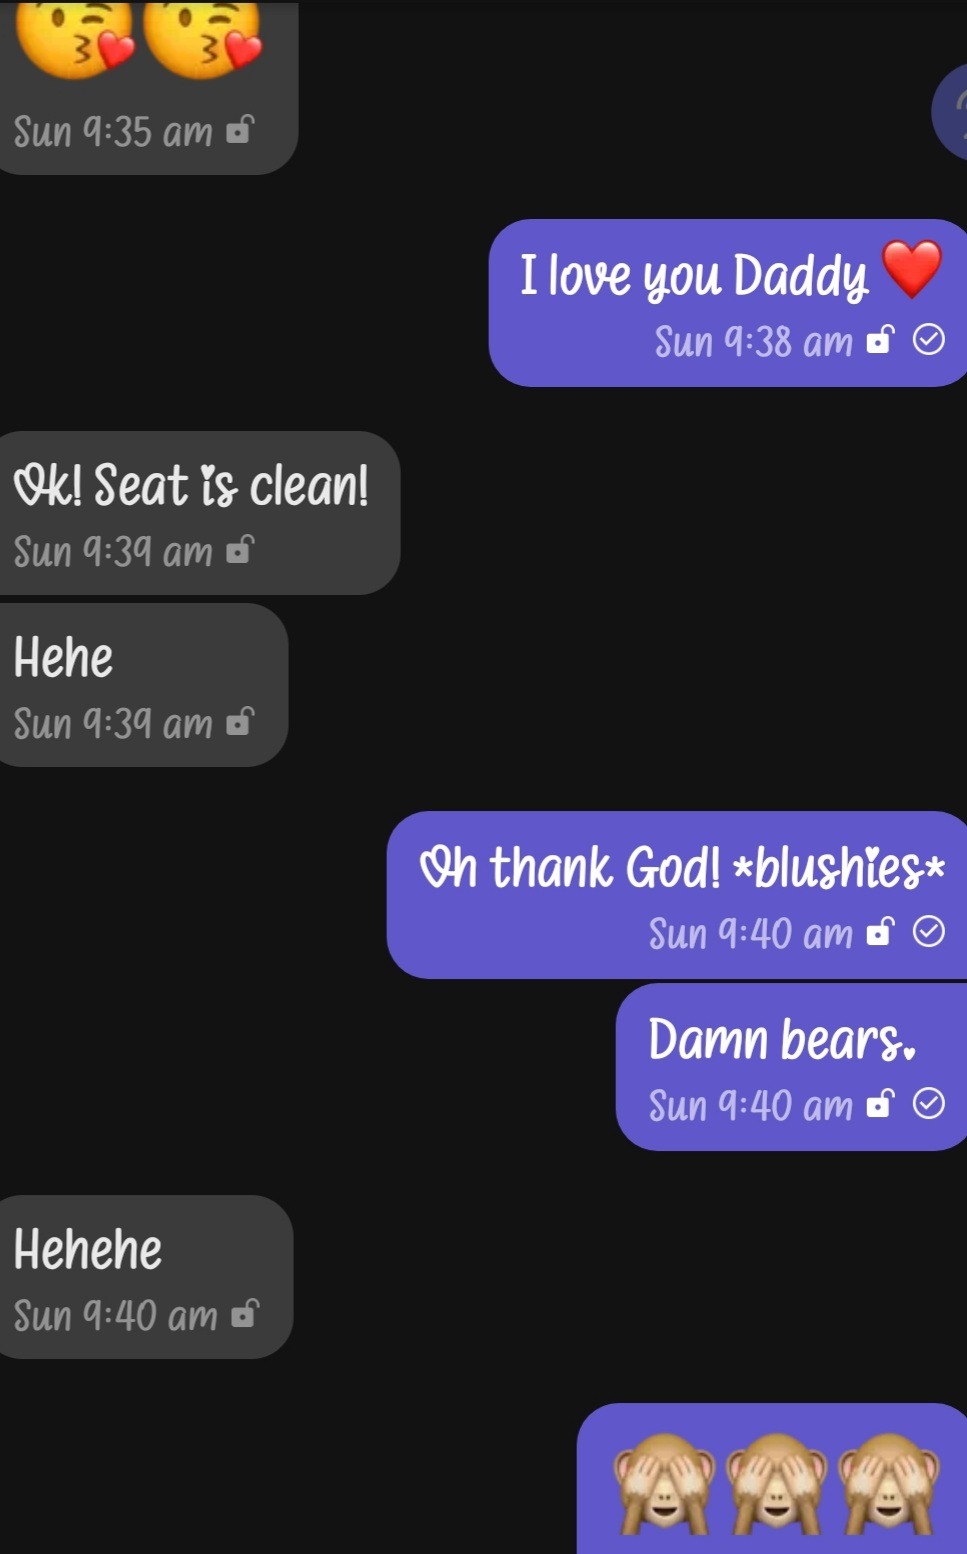 unicornsmooshie:Spontaneous Flood-Bustion 2: Attack of the Urine-Happy Bears & The Morning After⚠️ Warning ⚠️The following text messages may contain ideas not suitable for blushy little girls. Viewer discretion is advised by Daddy.A sampling